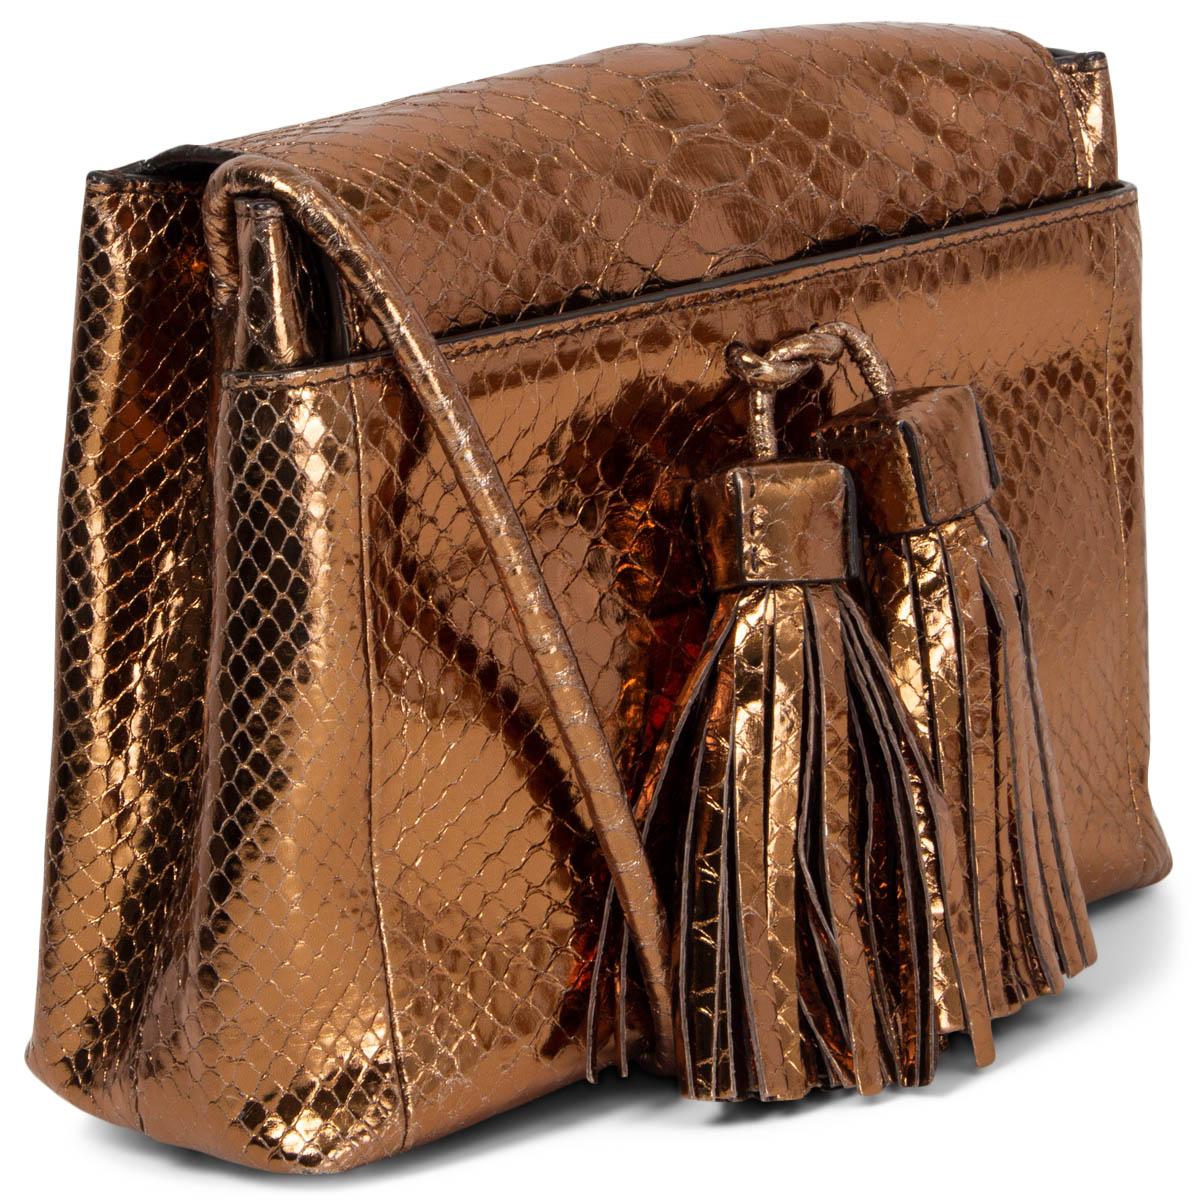 100% authentic Tom Ford Envelope Tassel shoulder bag in copper python with two oversized tassels at front. Opens with a magnetic closure. Lined in black calfskin with a middle zip pocket. Has been worn and is in excellent condition.